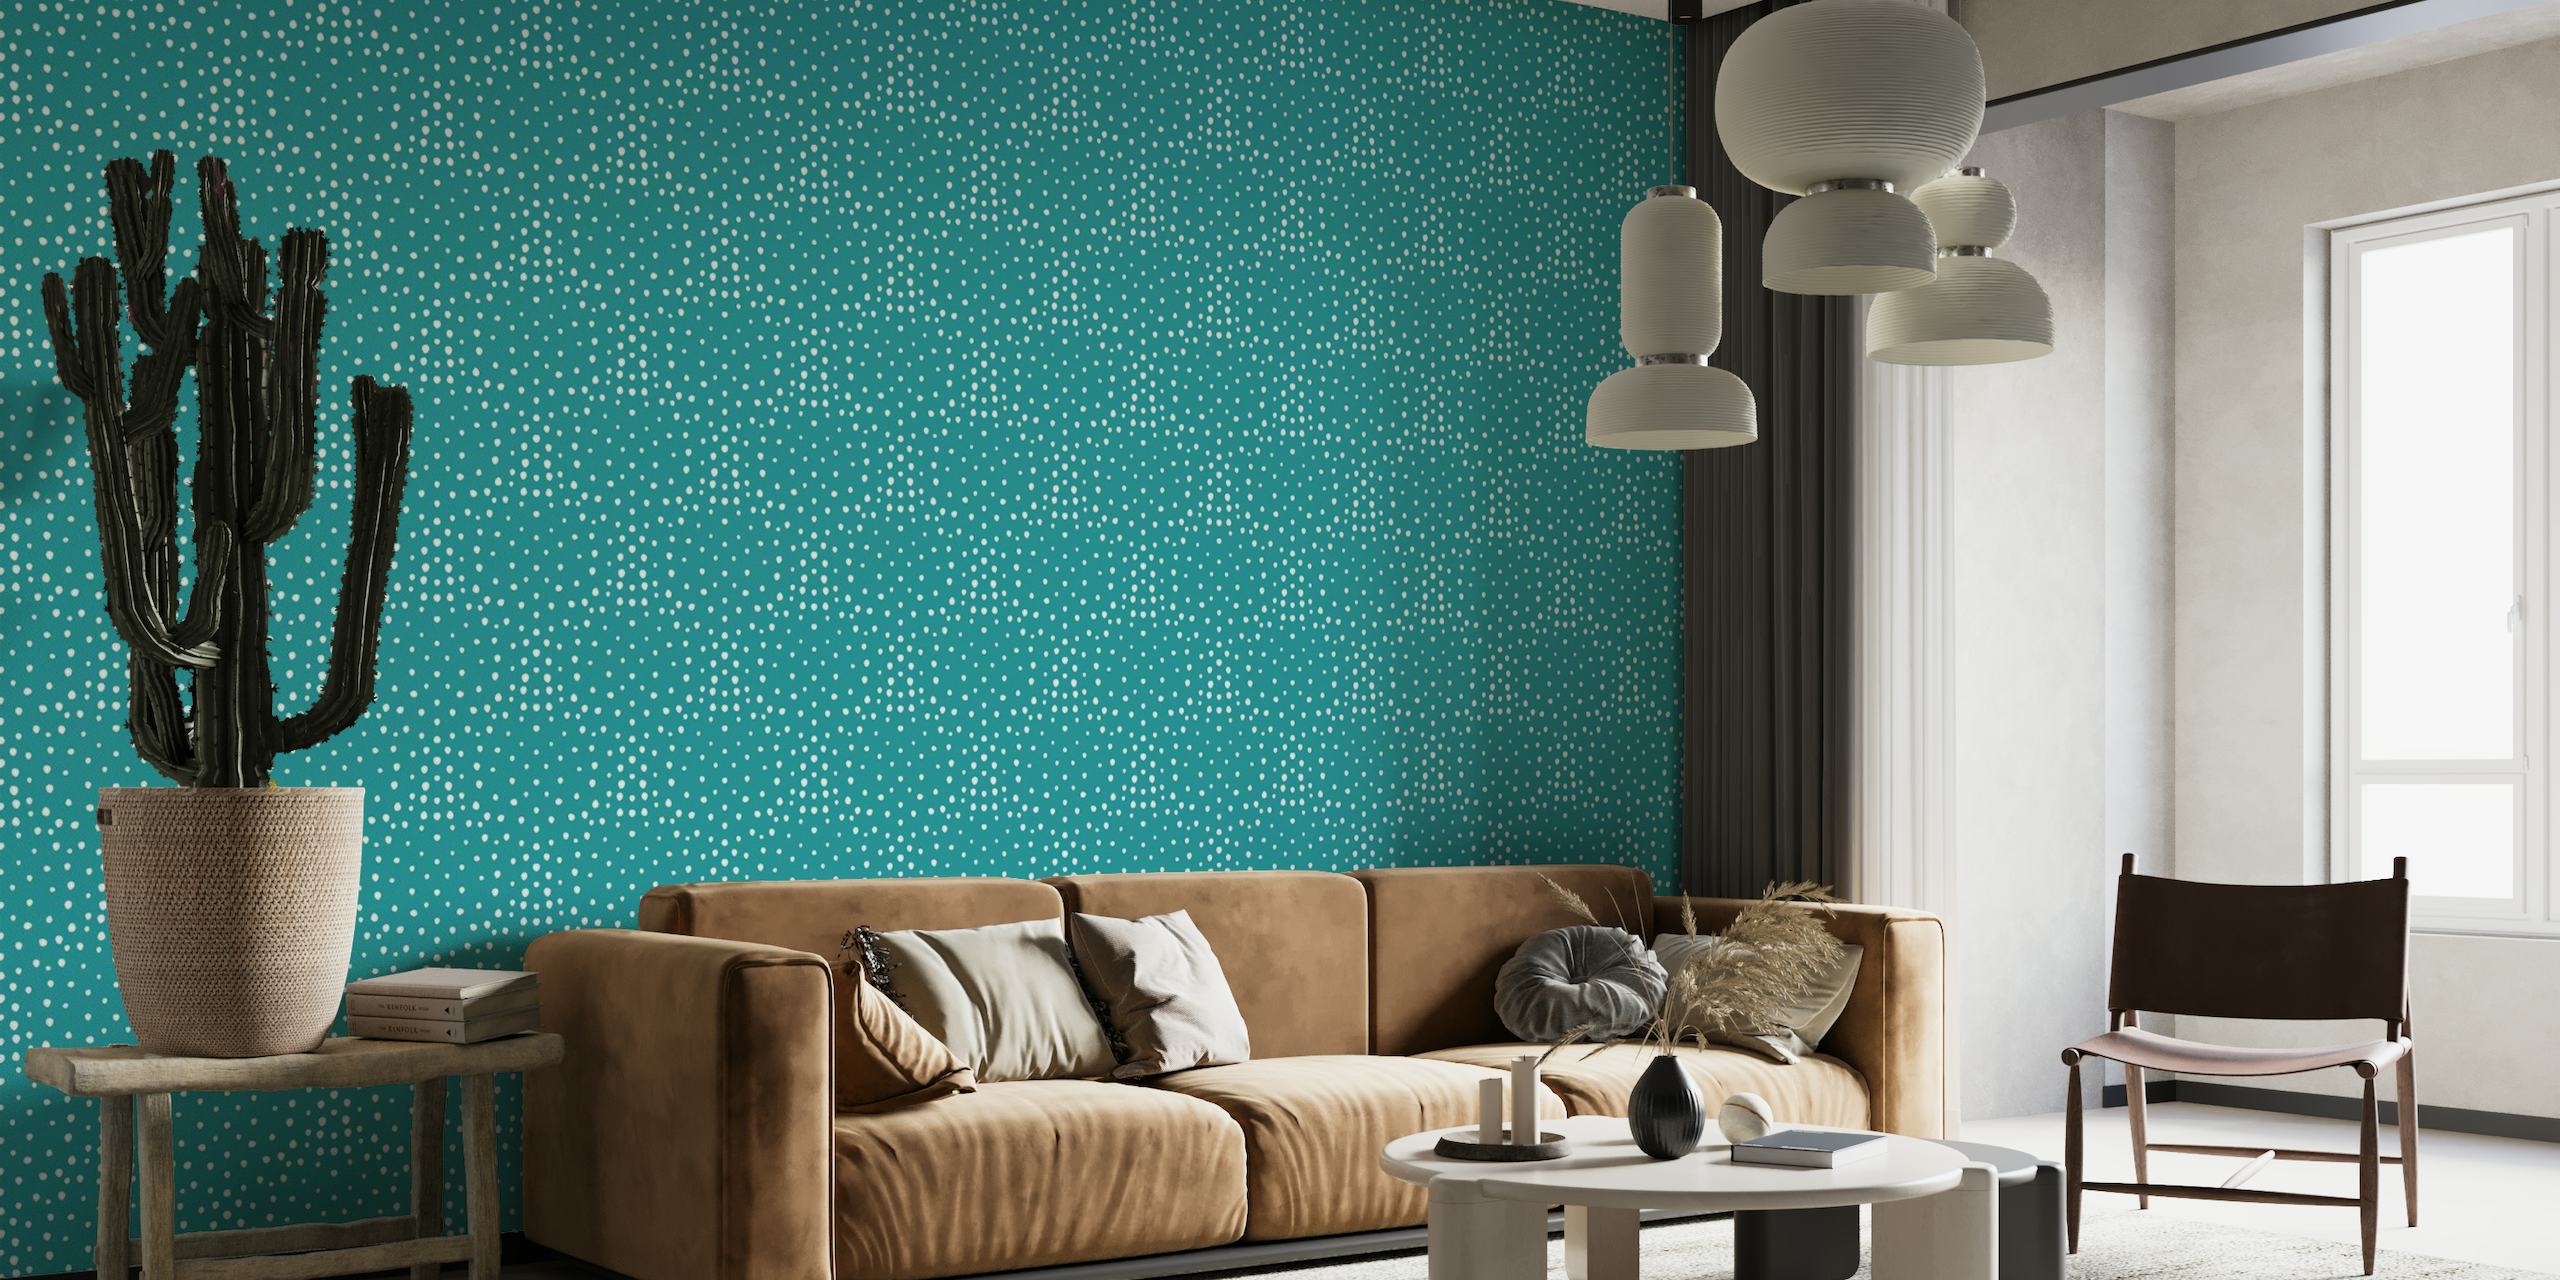 Turquoise Tranquility: Abstract Dots Blender Design - GD23-A17 carta da parati